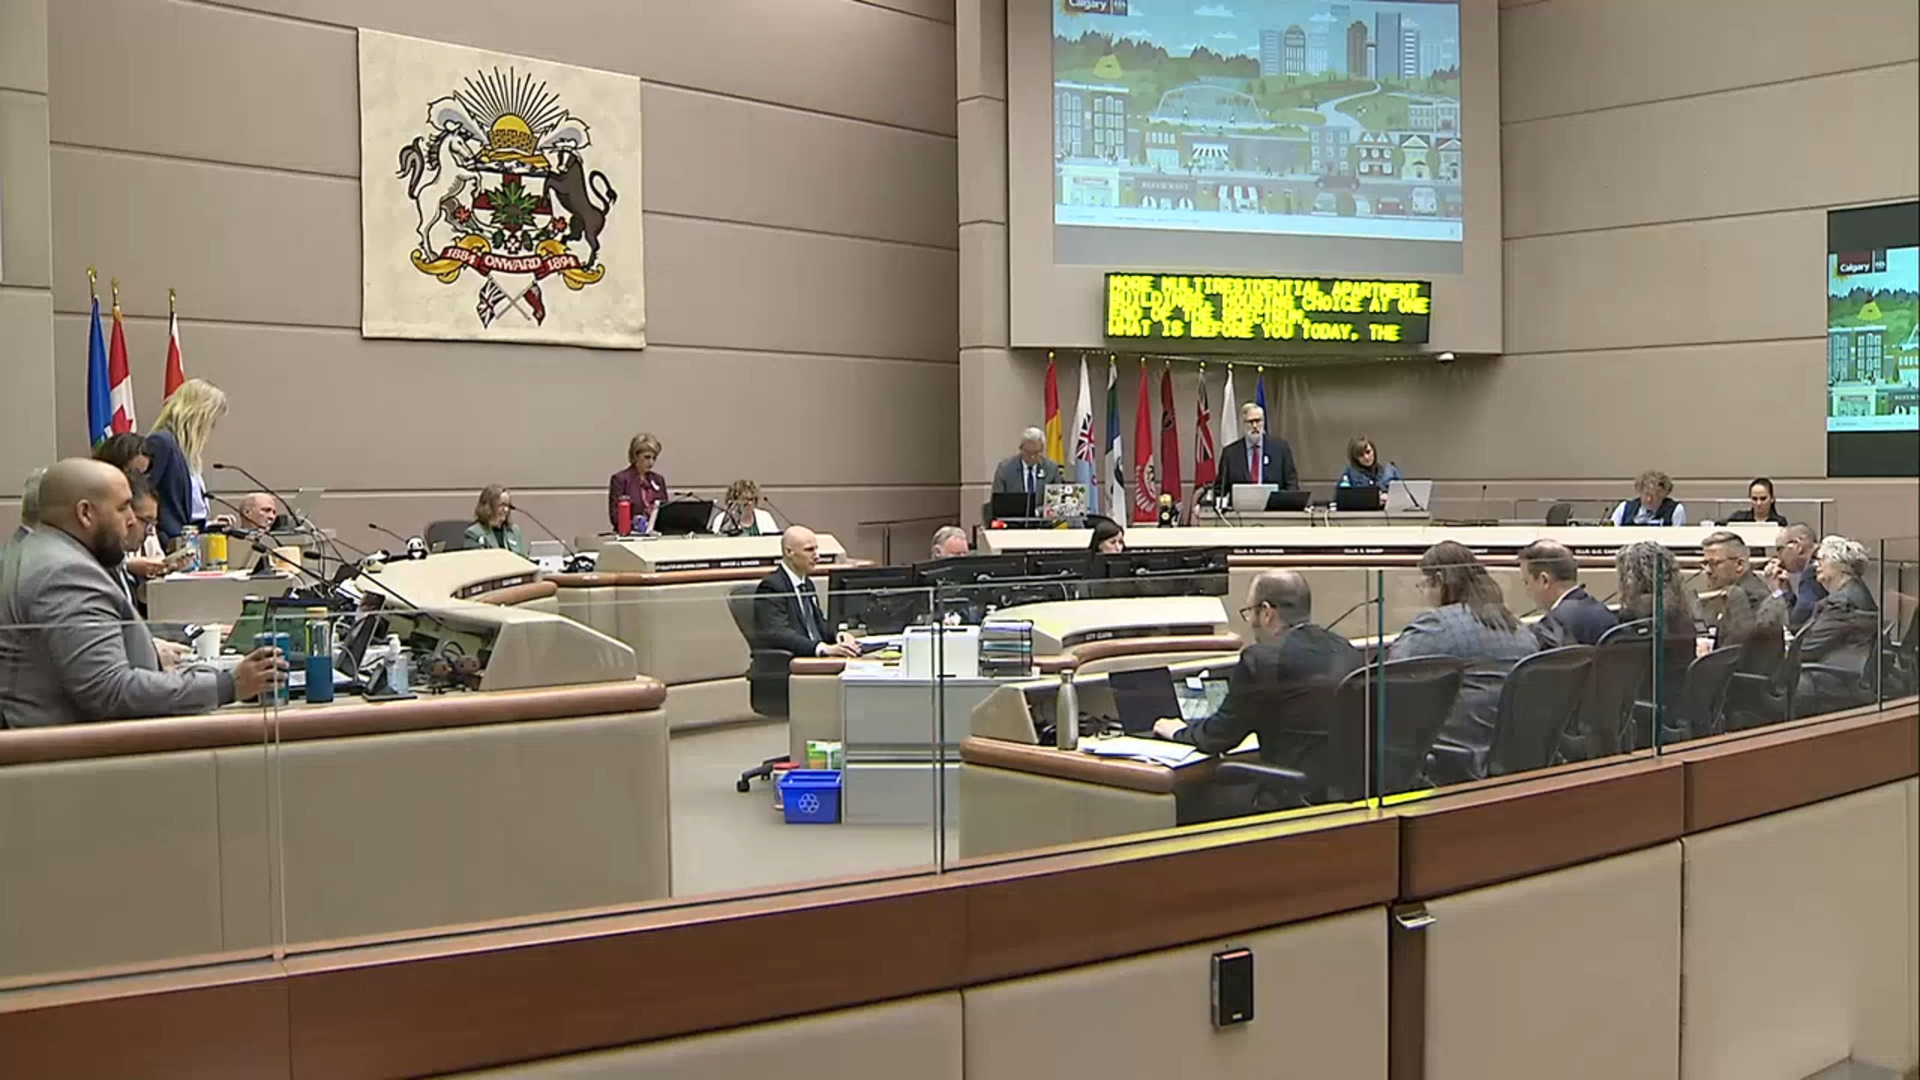 Calgary's blanket rezoning public hearing concludes